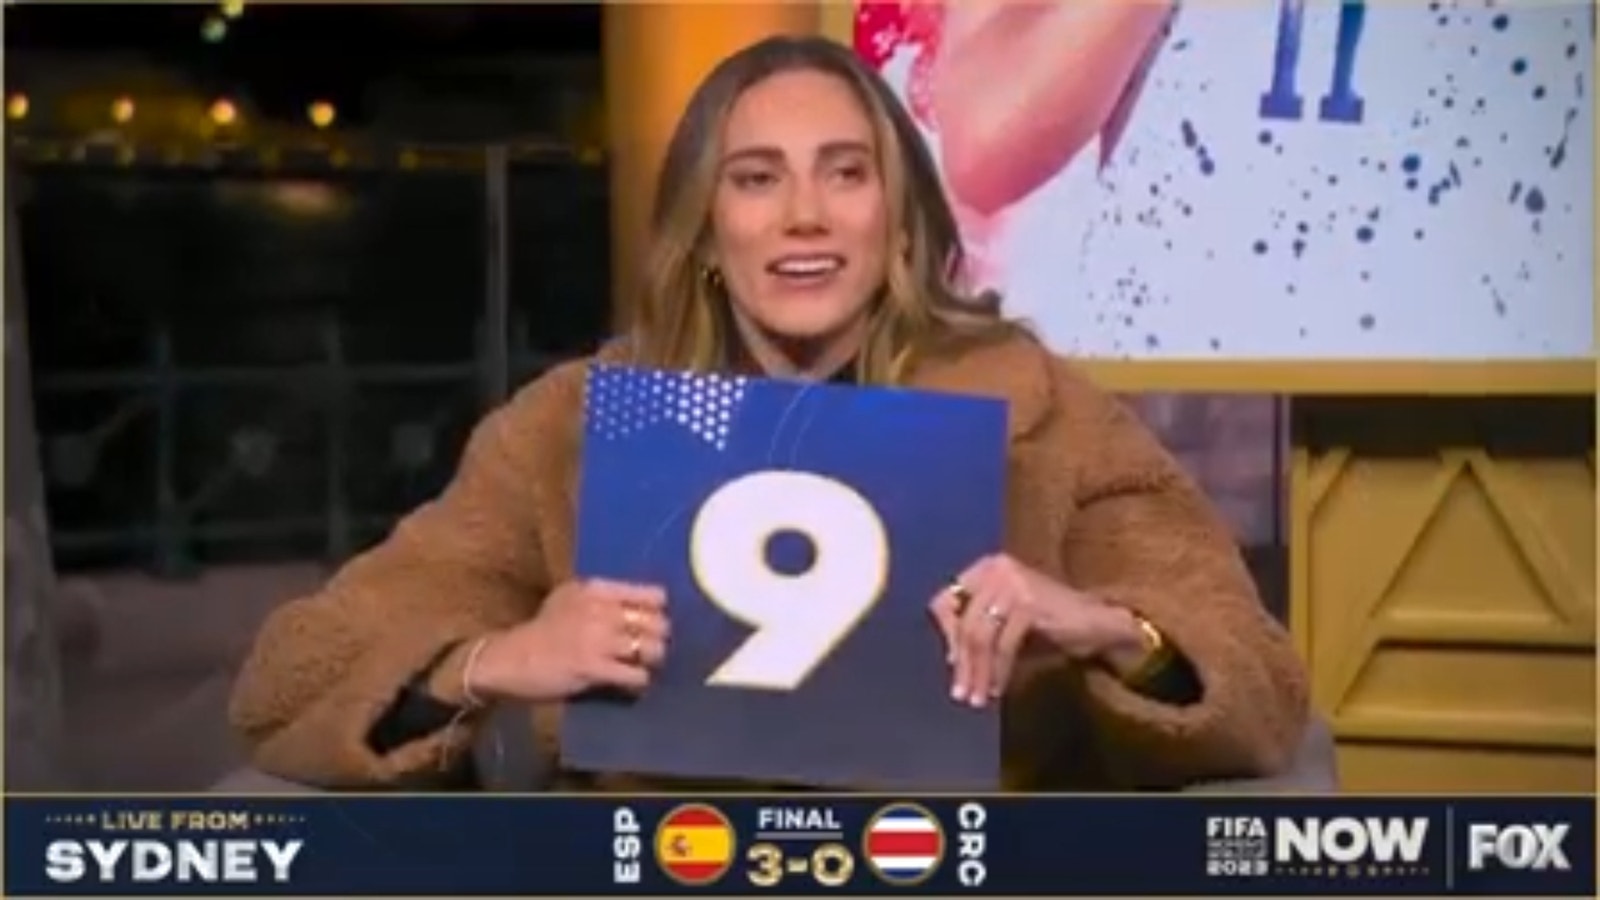 How many goals will the USWNT score against Vietnam?